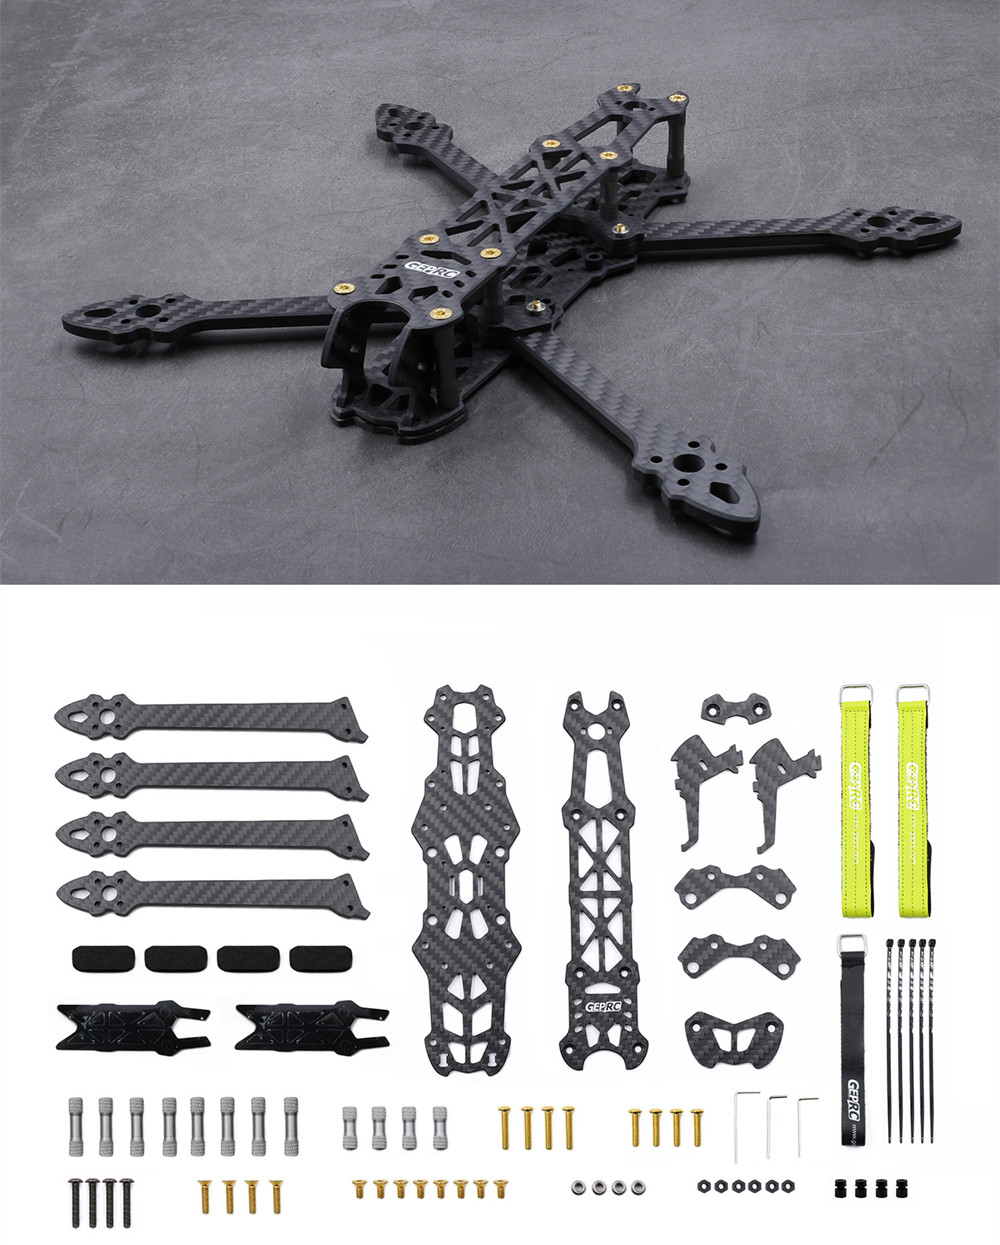 Geprc MARK4 225mm 5 Inch / 260mm 6 Inch / 295mm 7 Inch Frame Kit for RC Drone FPV Racing 5